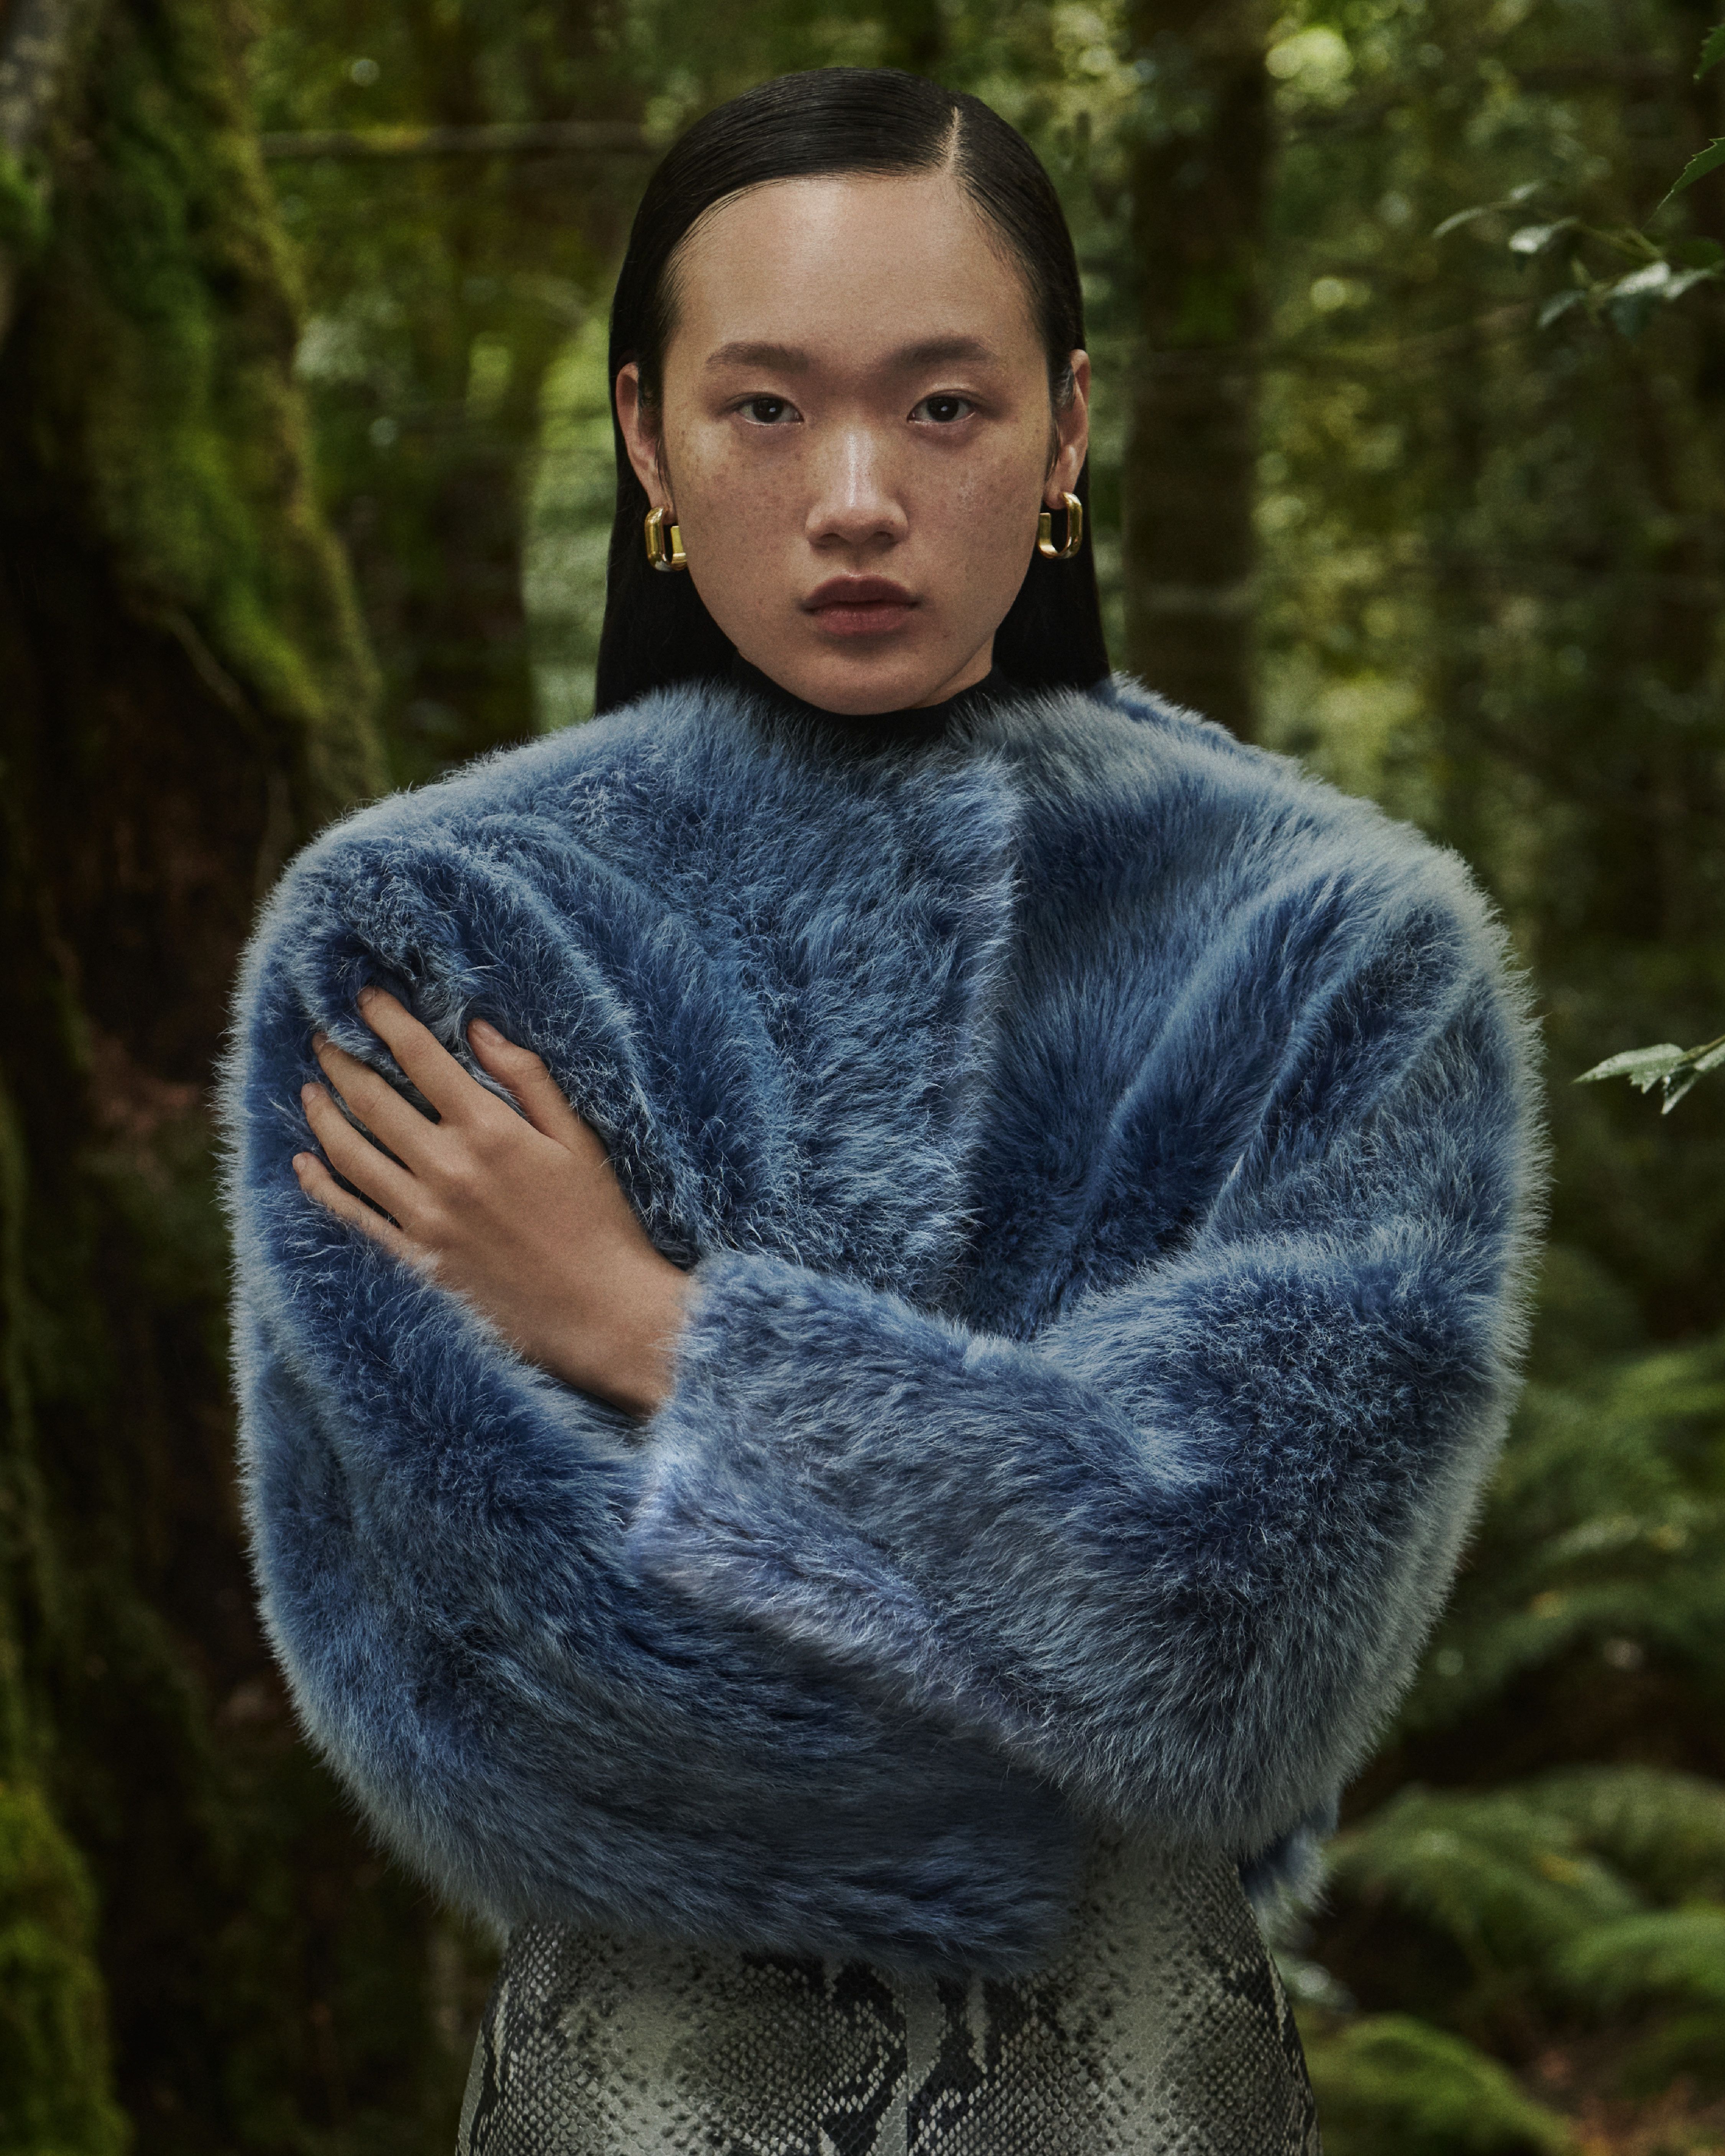 Mid shot of Venus He standing in the forest with arms crossed wearing a blue Toscana shearling jacket